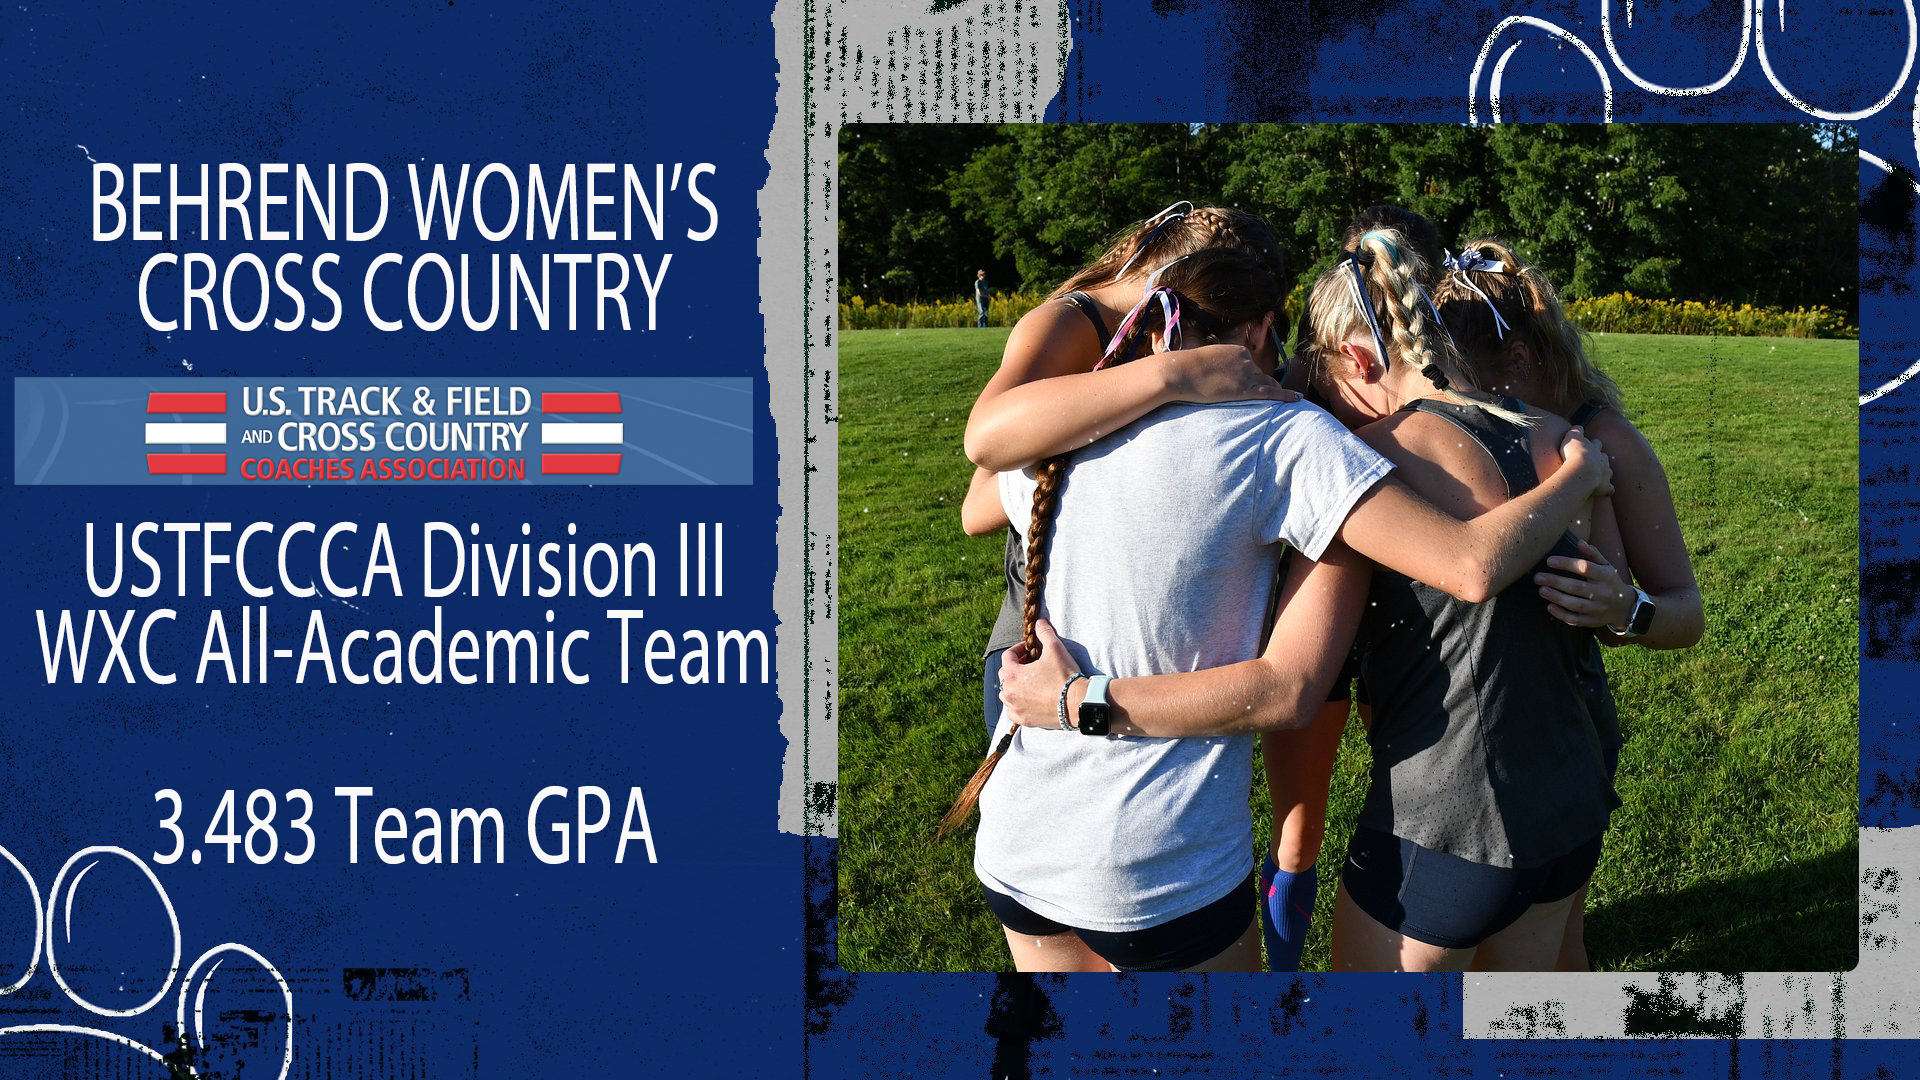 BEHREND WOMEN'S CROSS COUNTRY NAMED TO USTFCCCA ALL-ACADEMIC TEAM